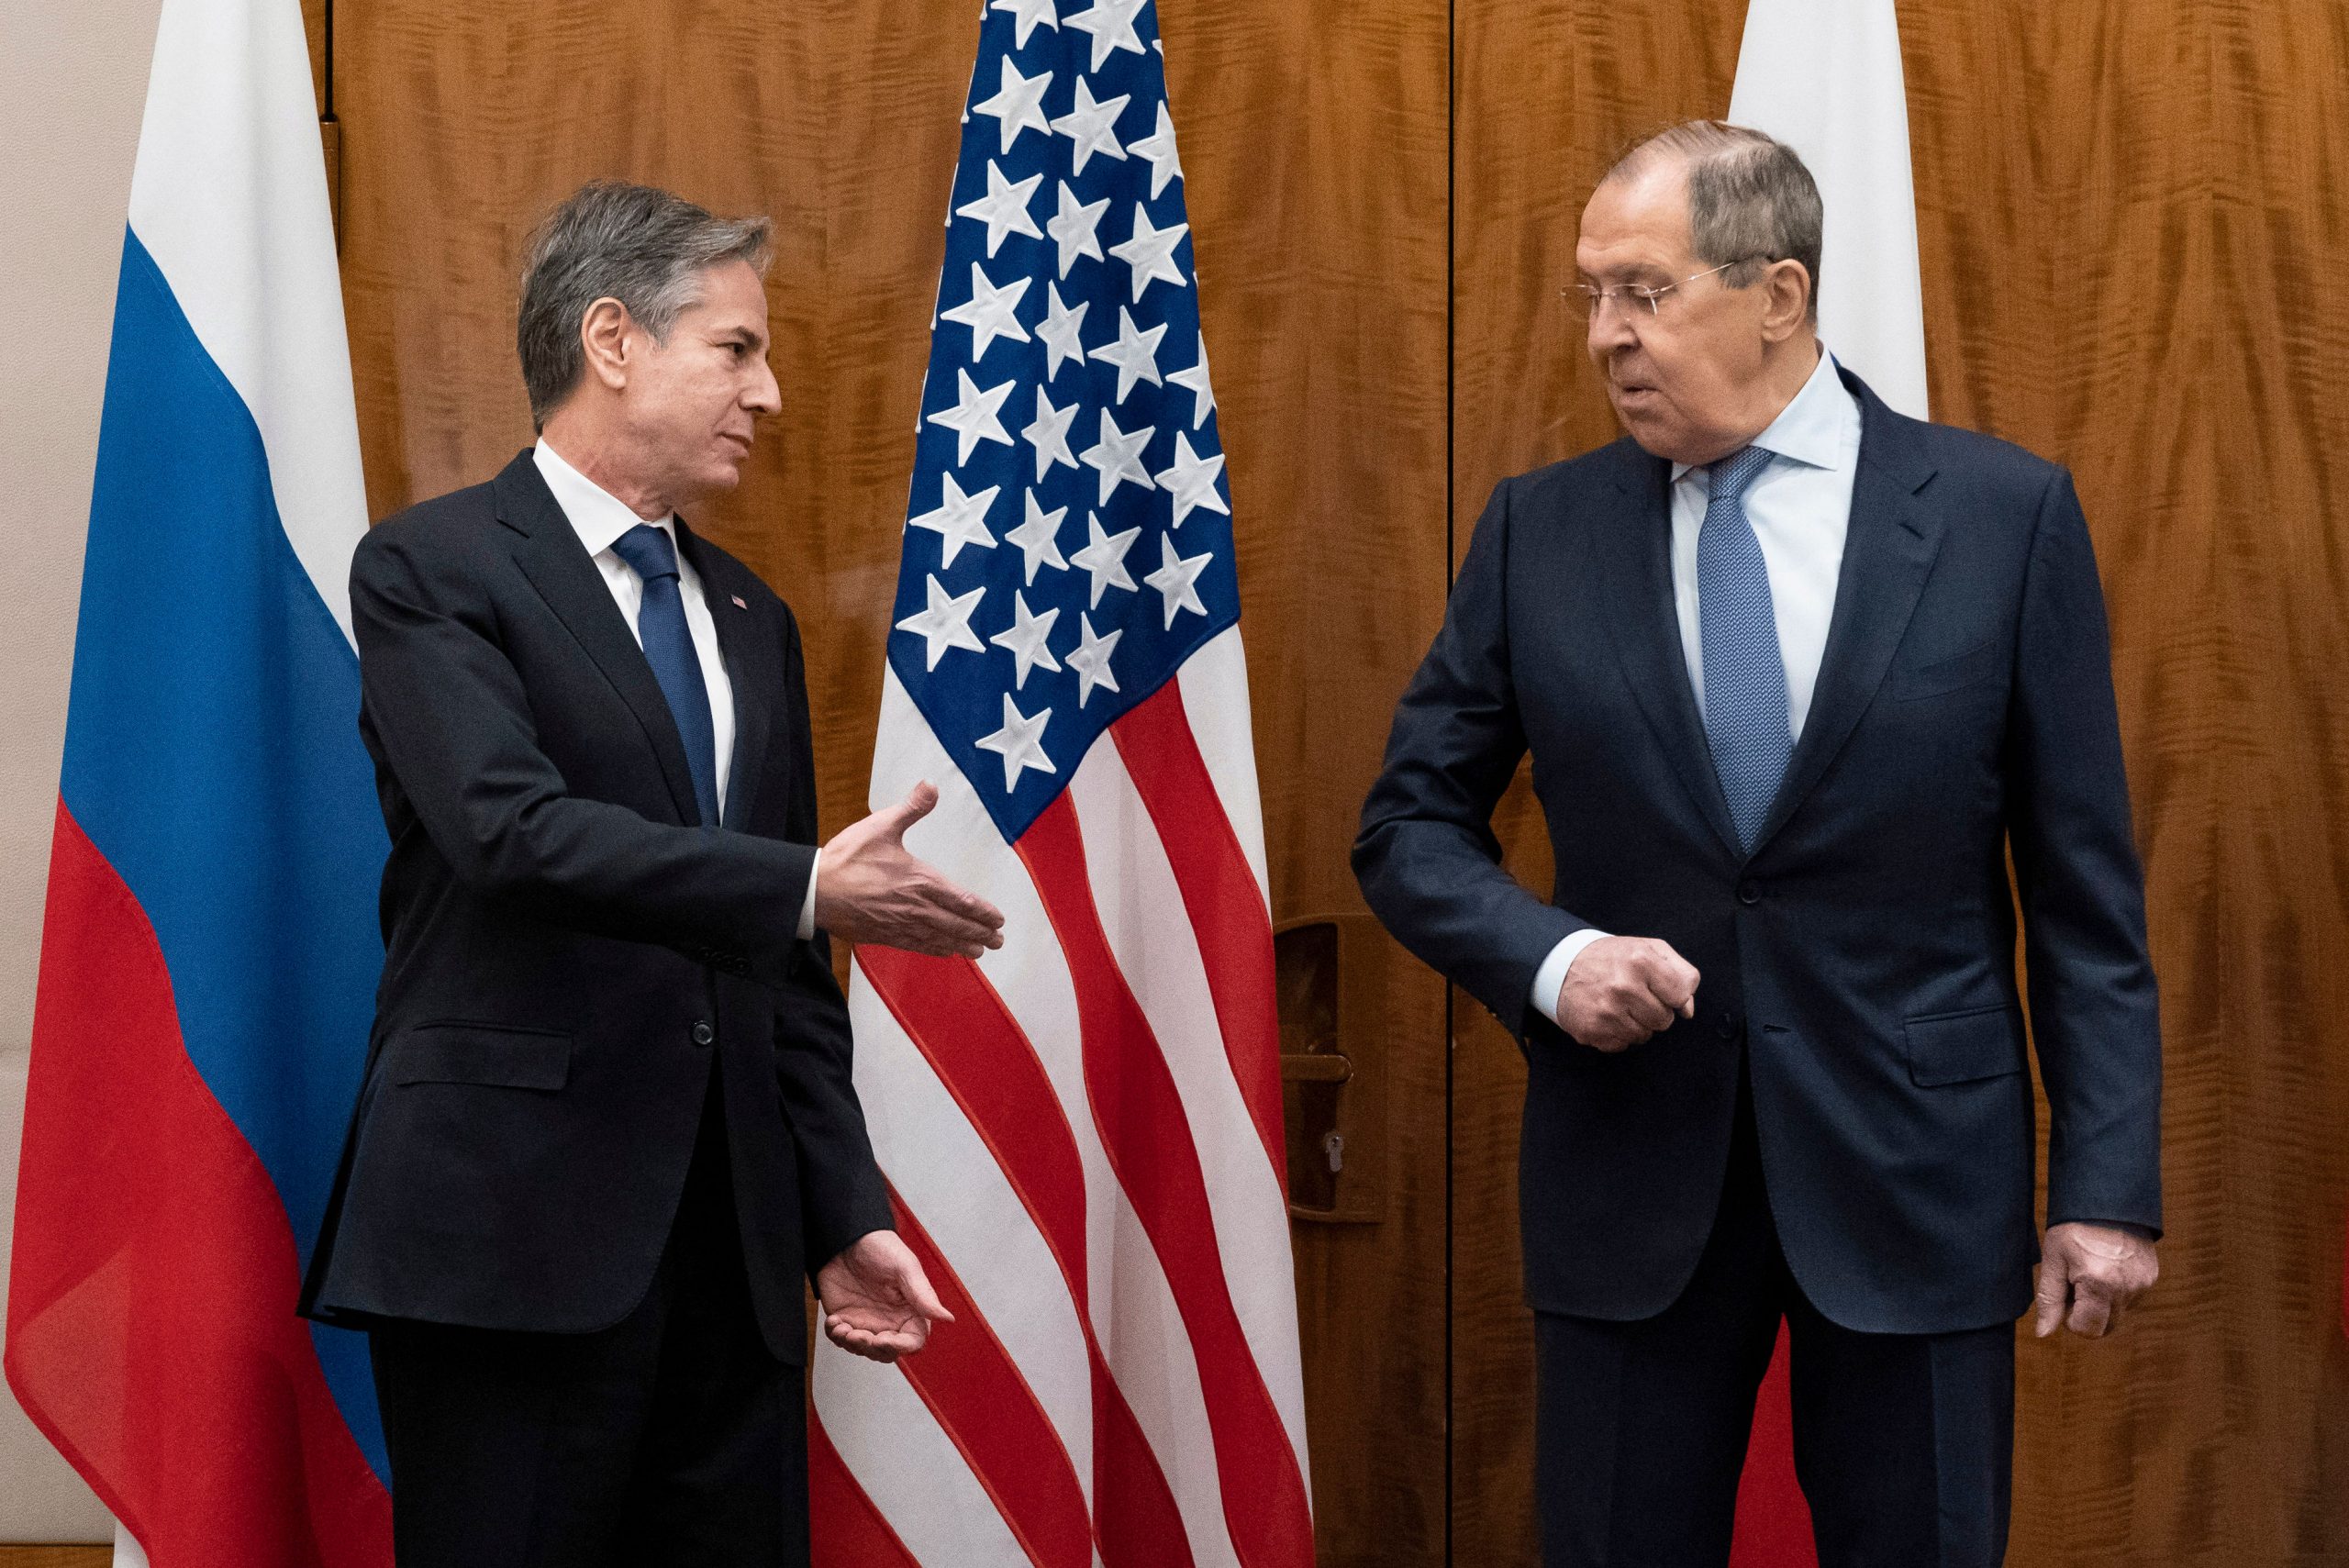 US, Russia to try more diplomacy amid tensions over Ukraine